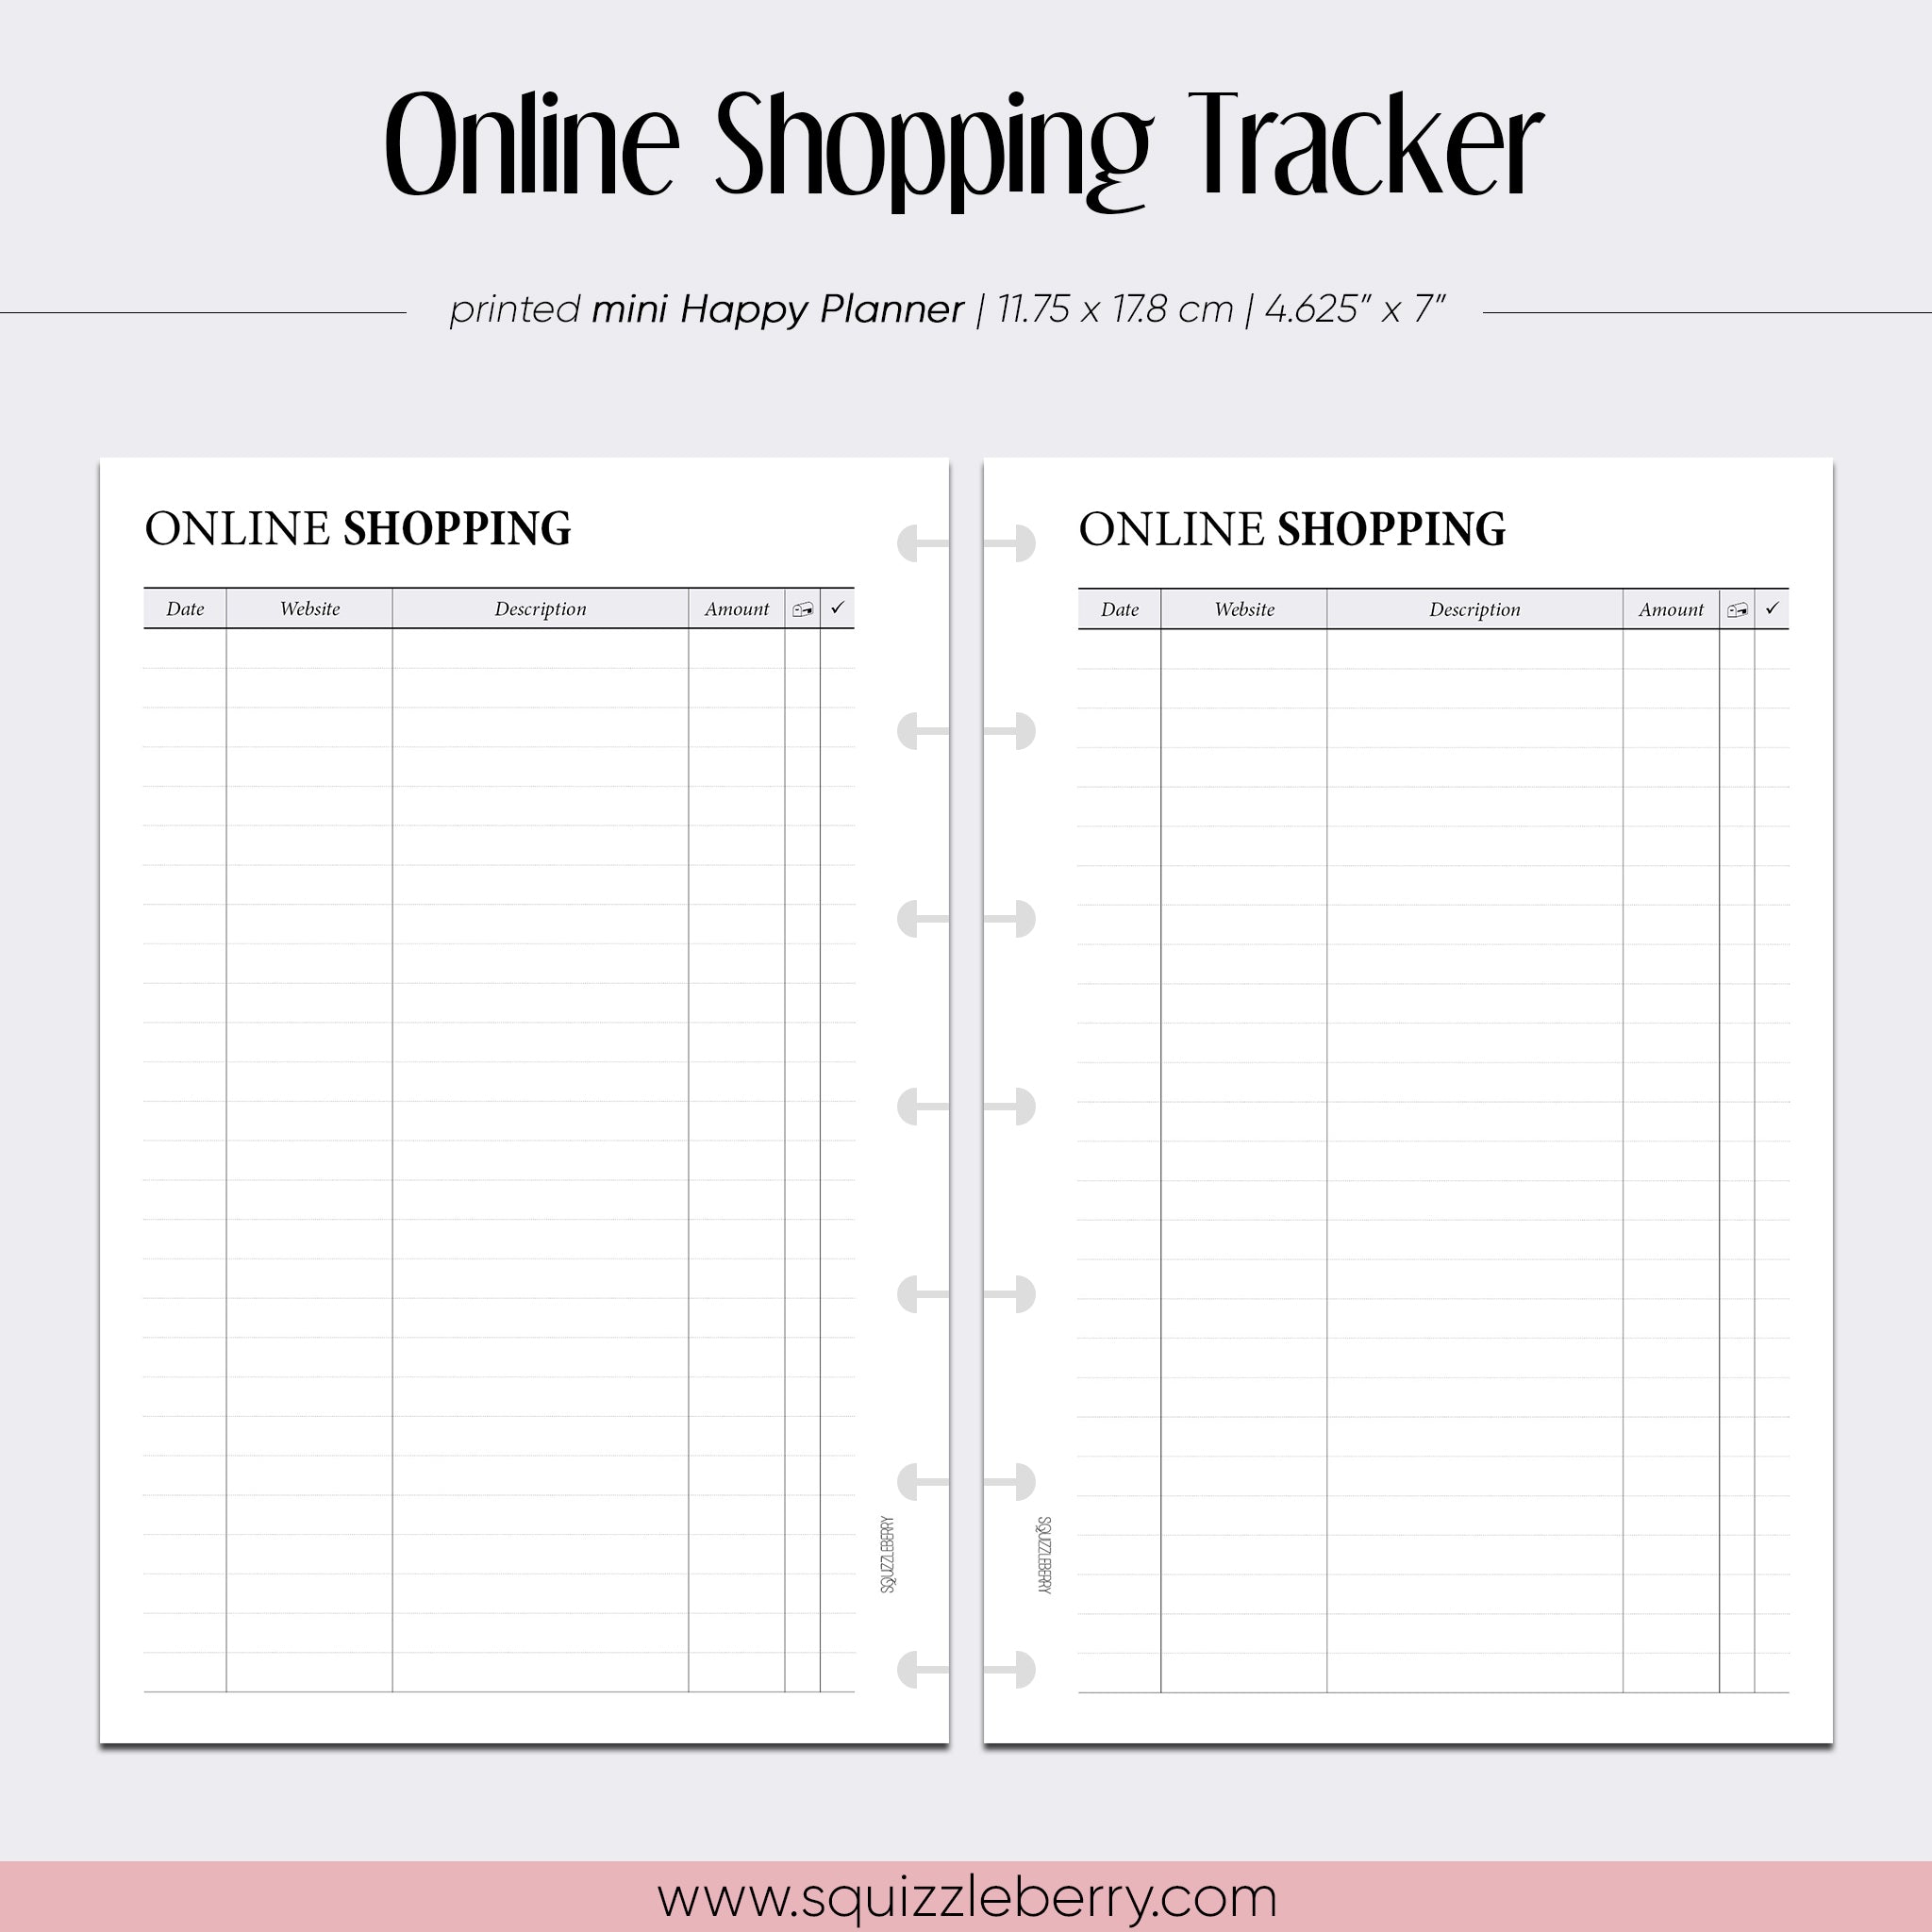 Online Shopping Tracker - Mini HP | SquizzleBerry